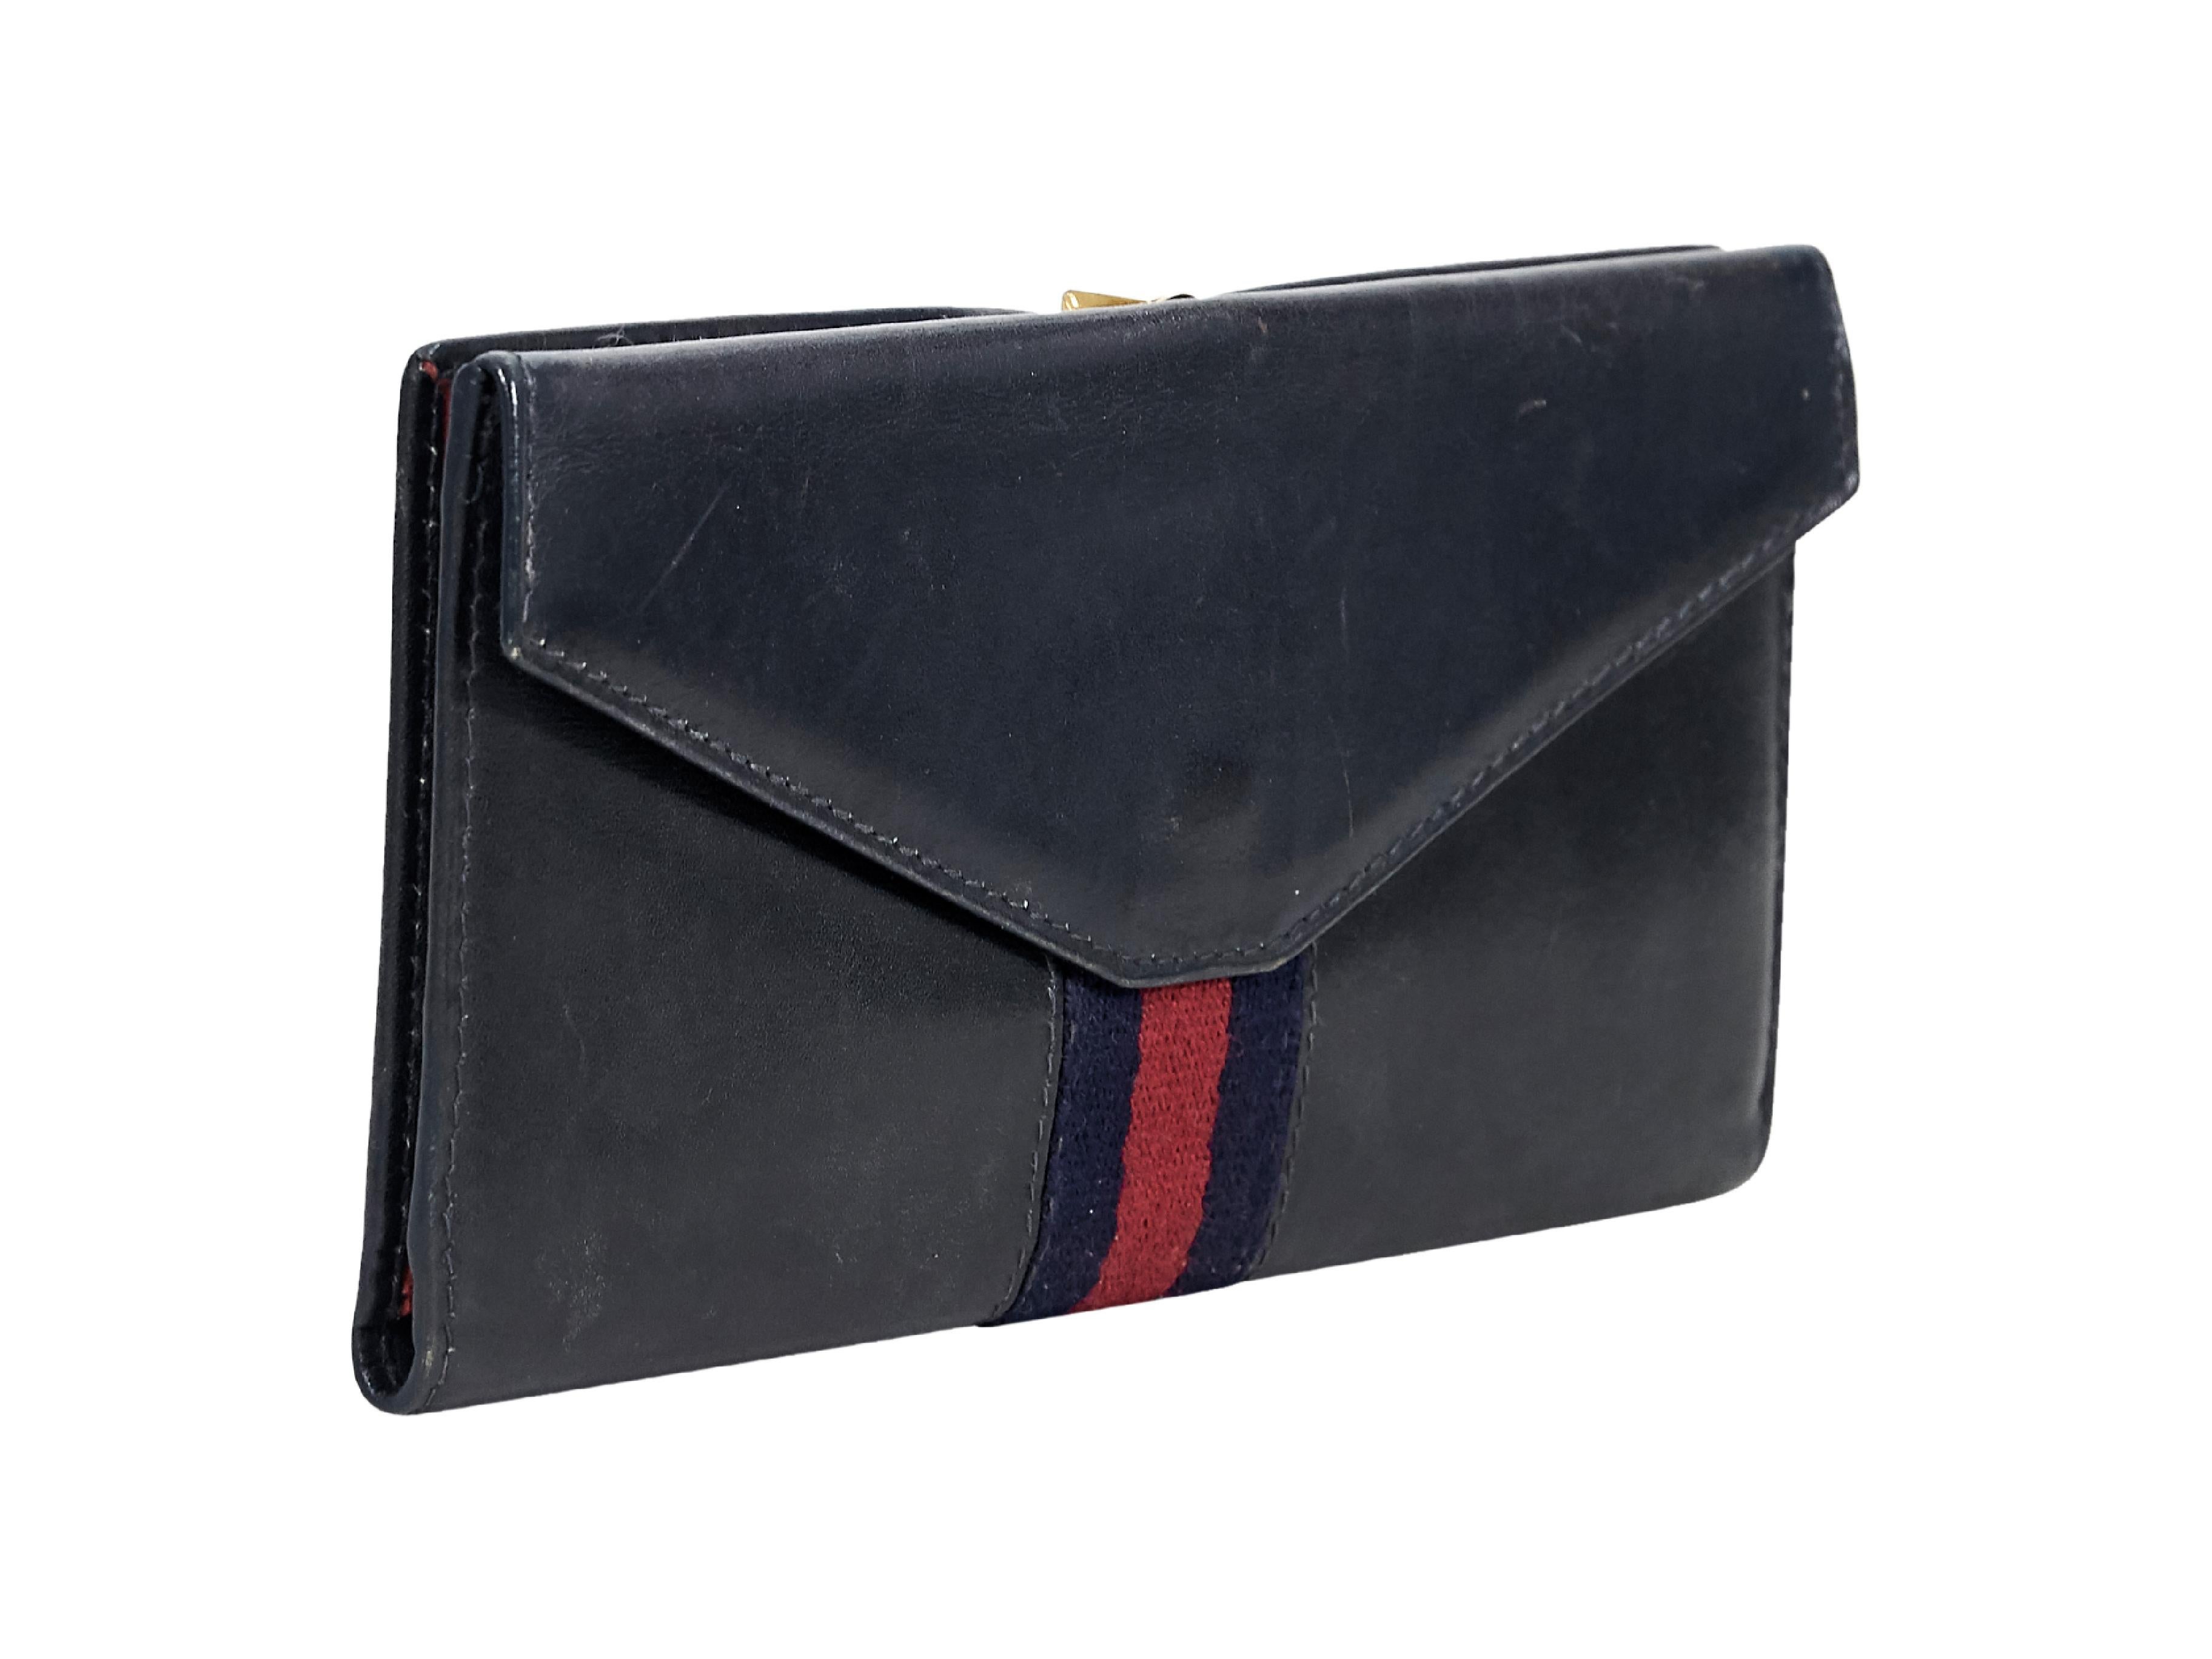 Product details:  Vintage navy blue leather wallet by Gucci.  Striped canvas accent.  Top flip-lock closure.  Red saffiano leather lined interior with inner slide pockets.  Front snap flap coin pouch.  Goldtone hardware.  7